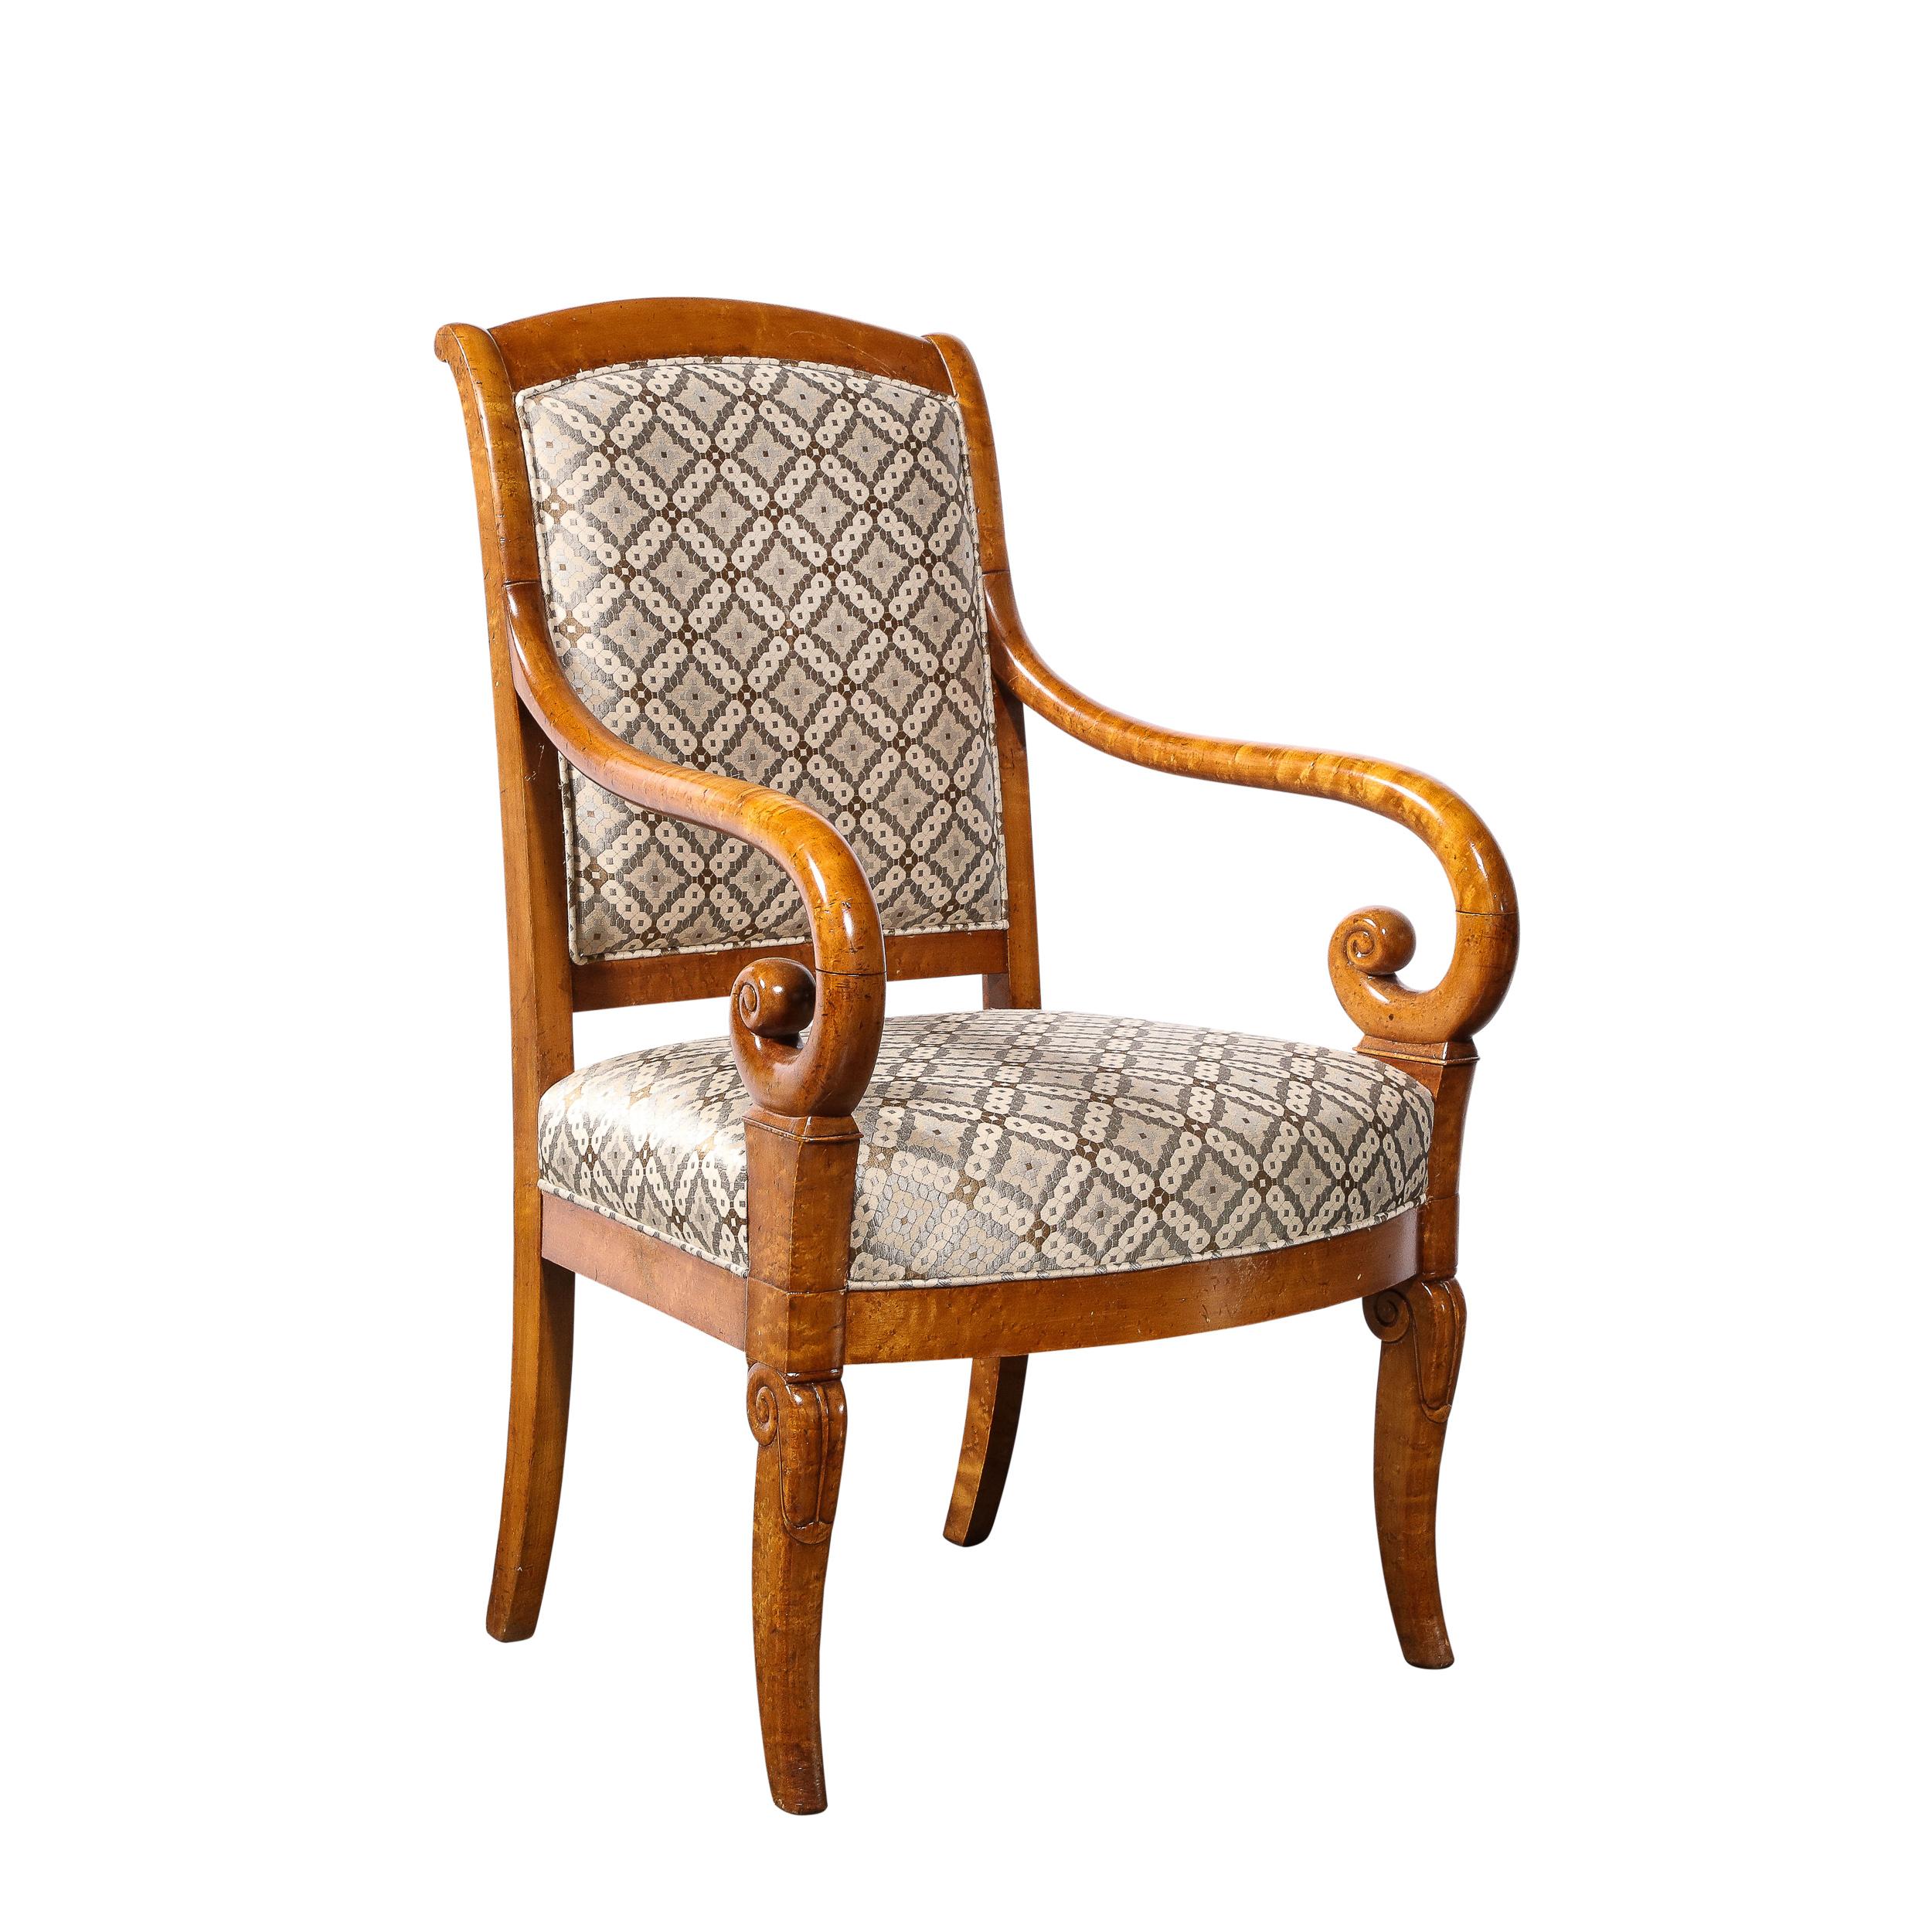 This elegant and sculptural pair of Biedermeier arm chairs were realized in Austria circa 1880. Realized in a stunning burled elm- showcasing the sumptuous natural grain of the wood- they feature stylized cabriolet style legs with scroll form